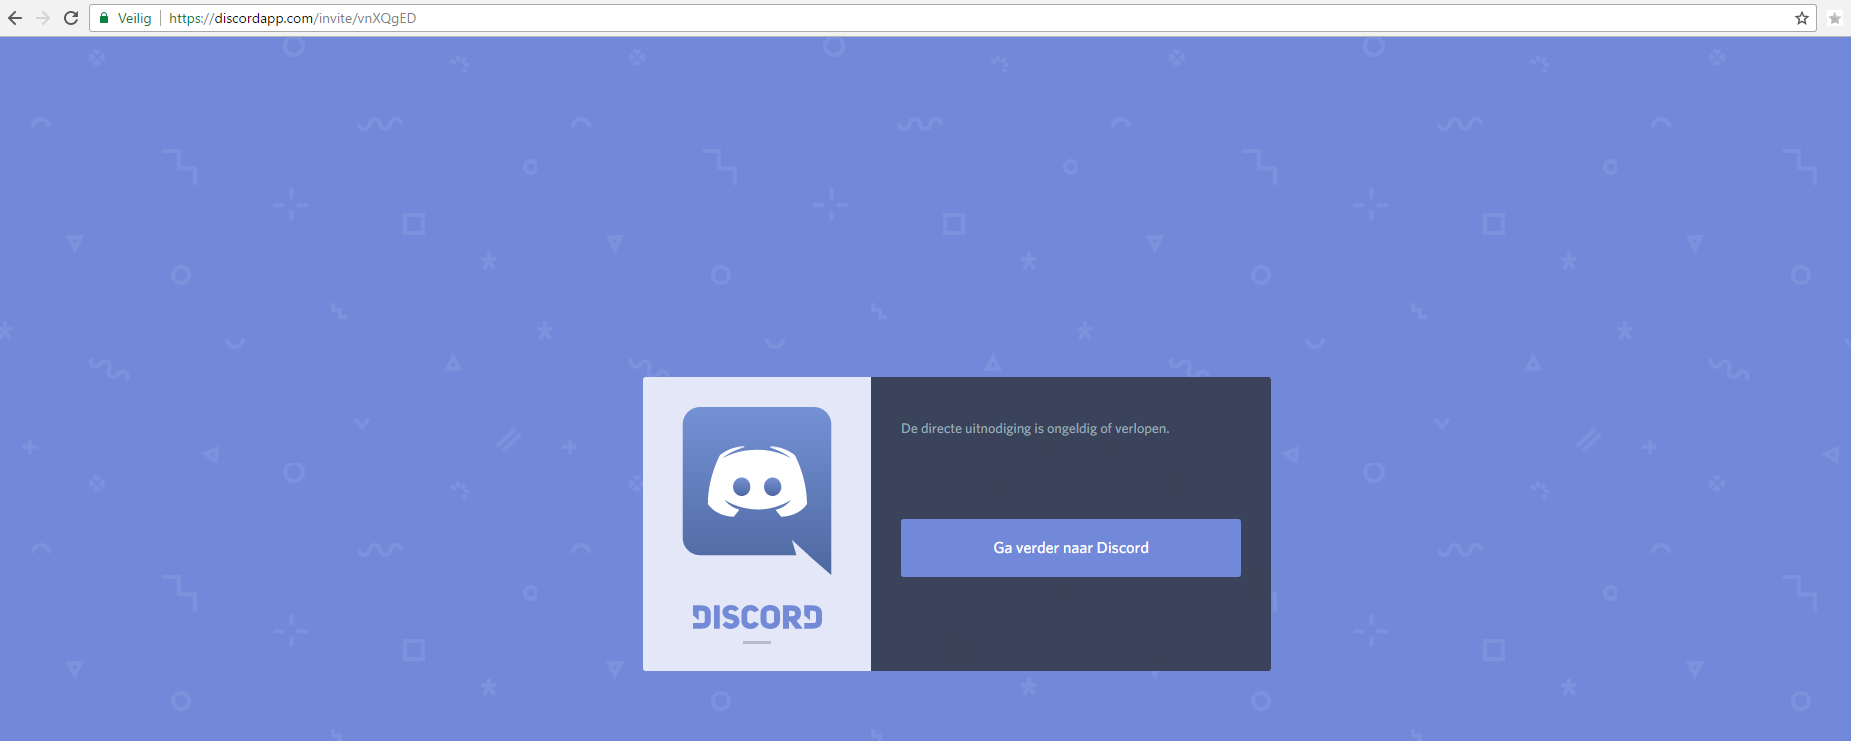 discord2.png